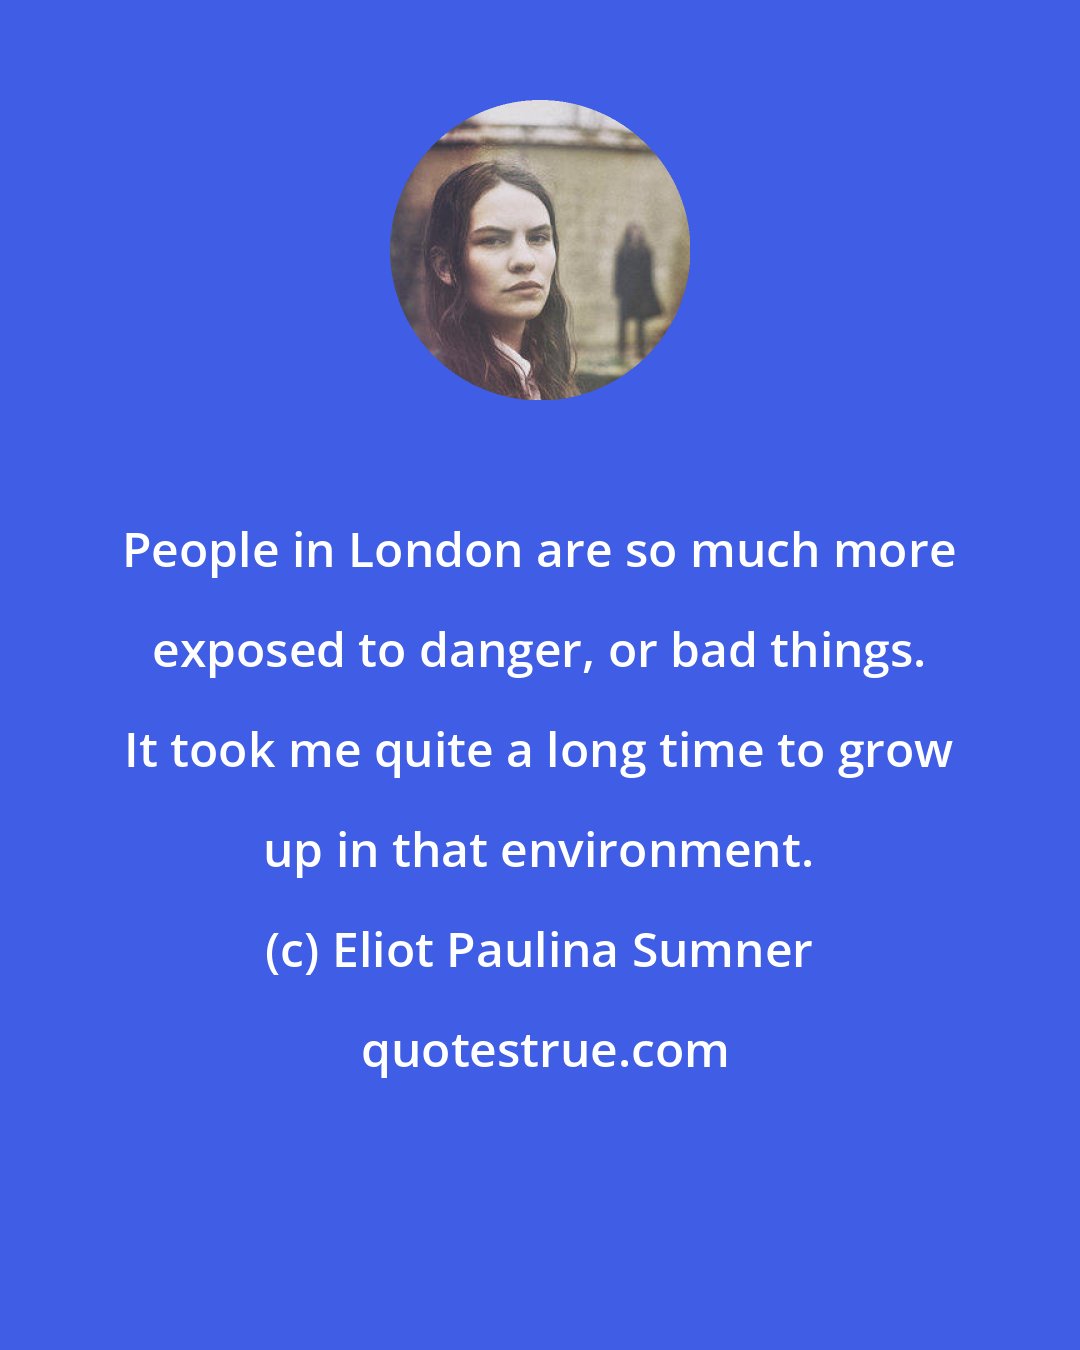 Eliot Paulina Sumner: People in London are so much more exposed to danger, or bad things. It took me quite a long time to grow up in that environment.